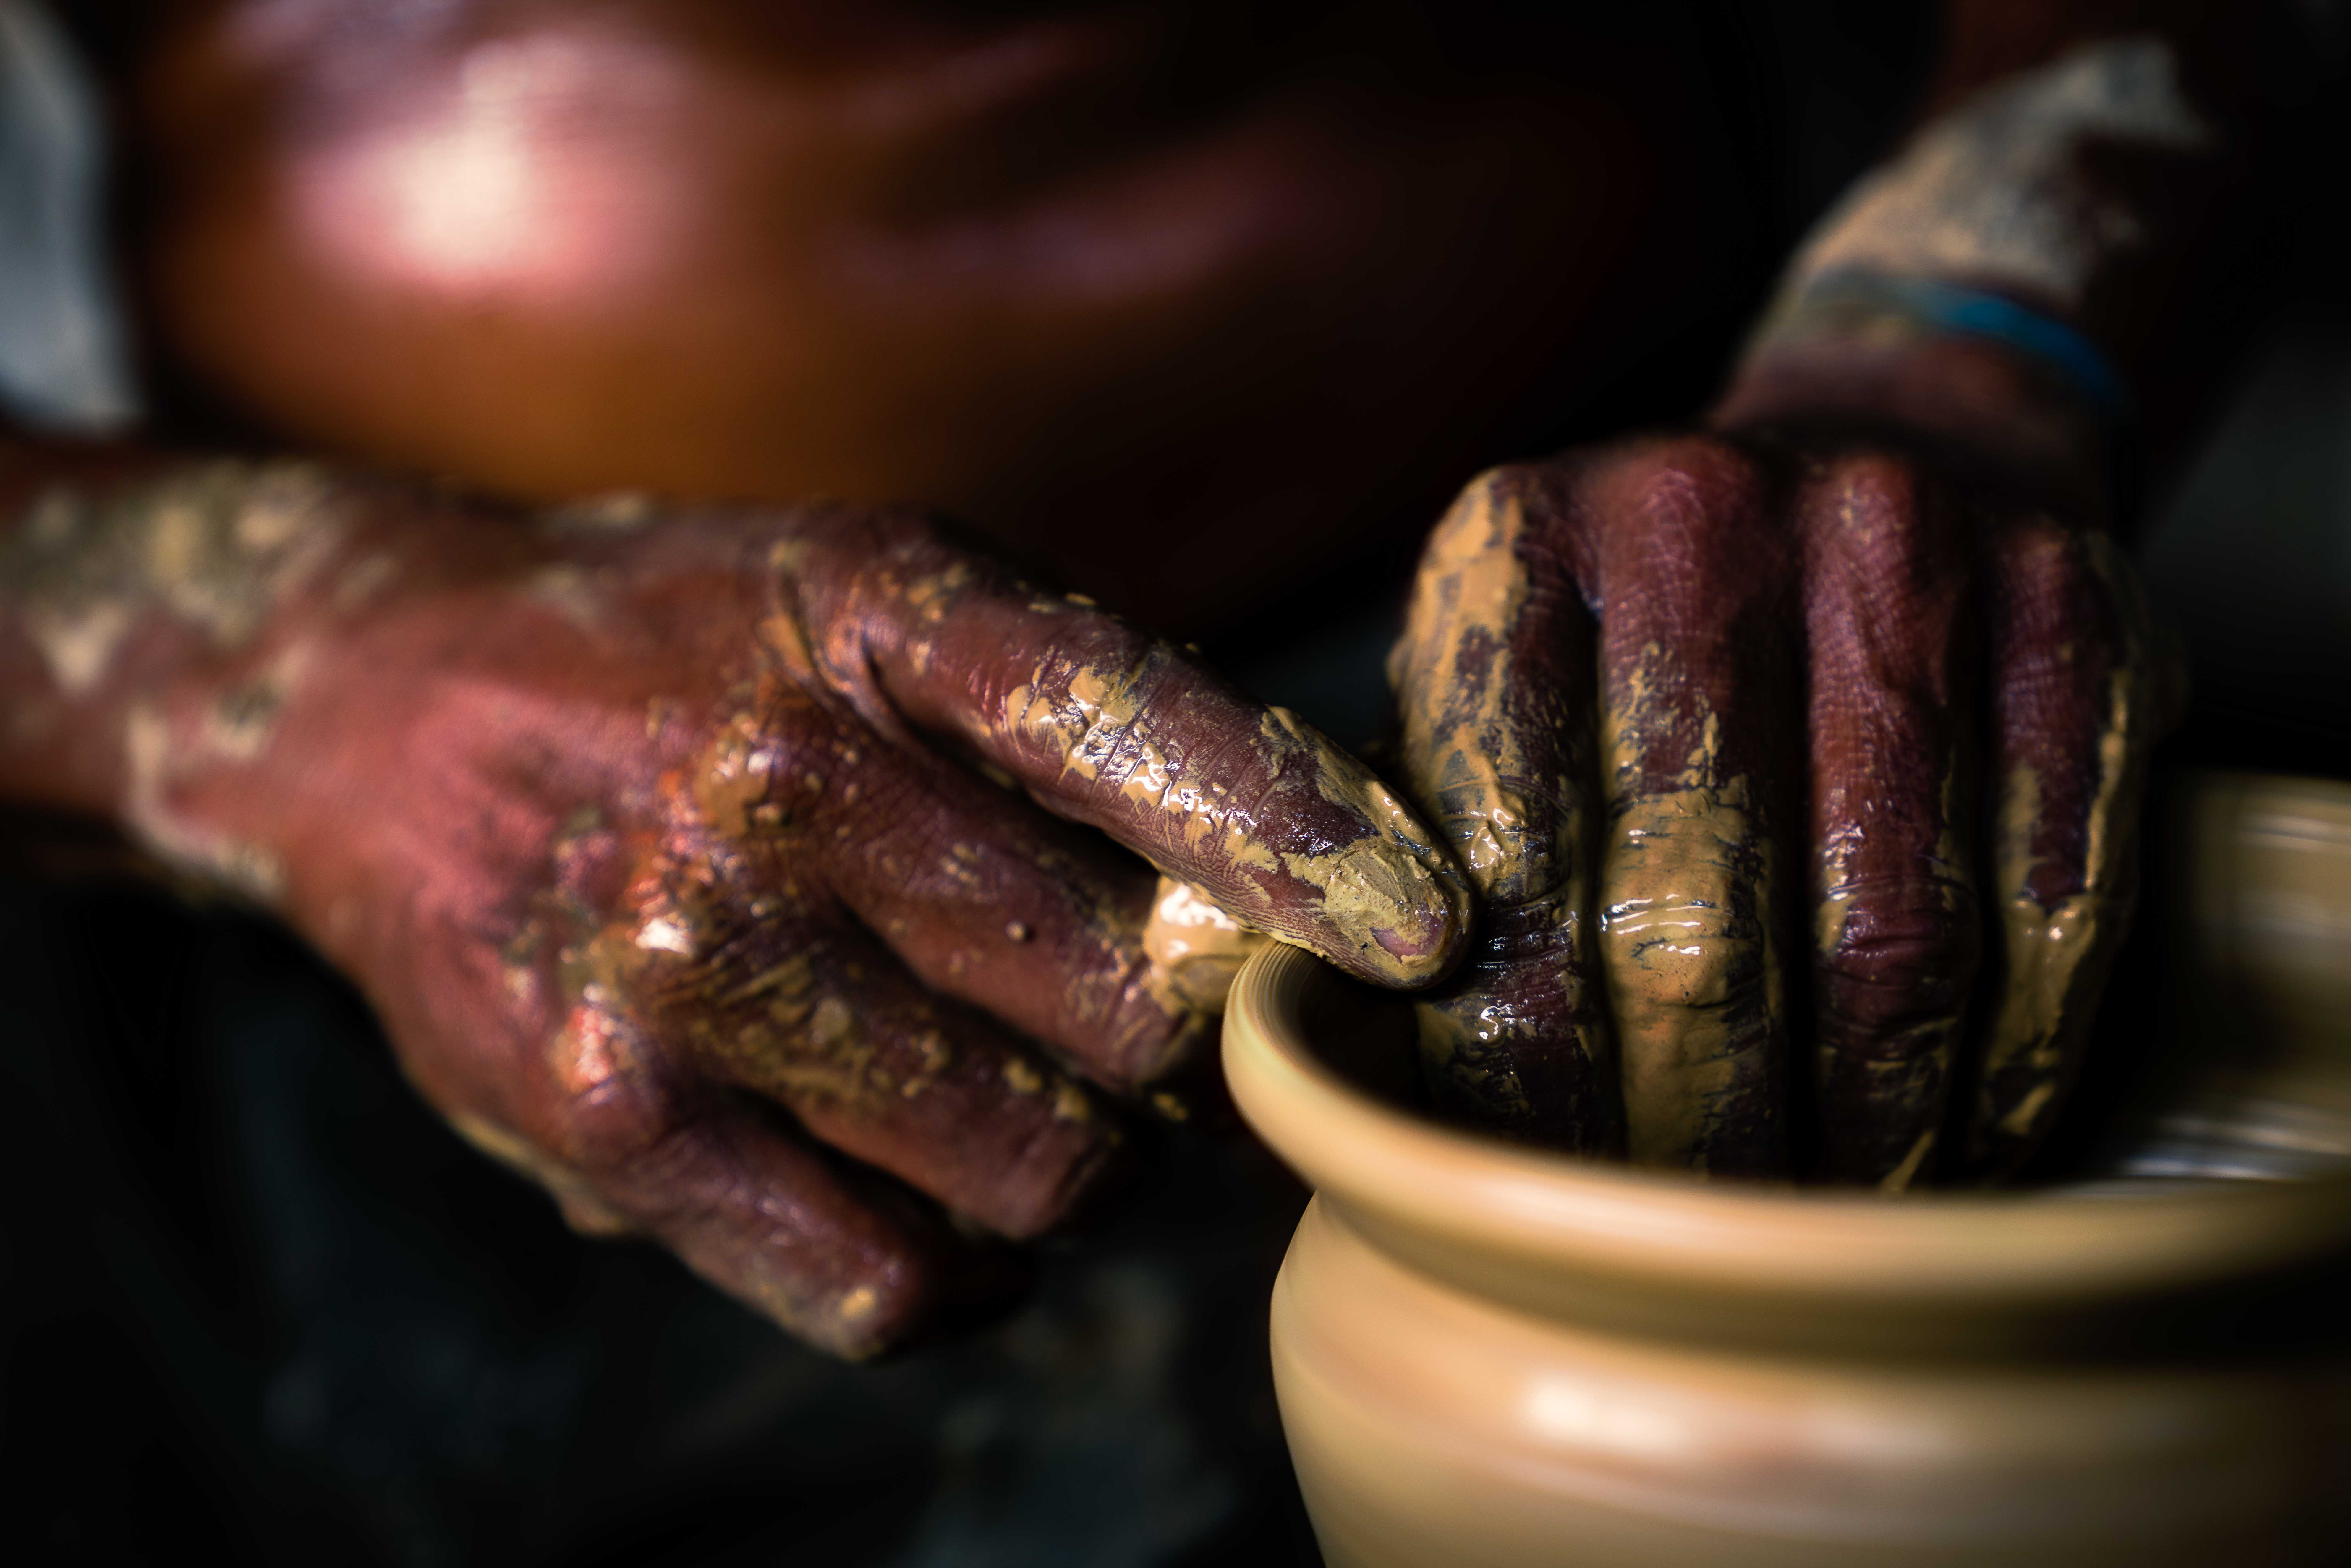 Hands and clay in perfect integration for more than 30 years of craftsmanship.